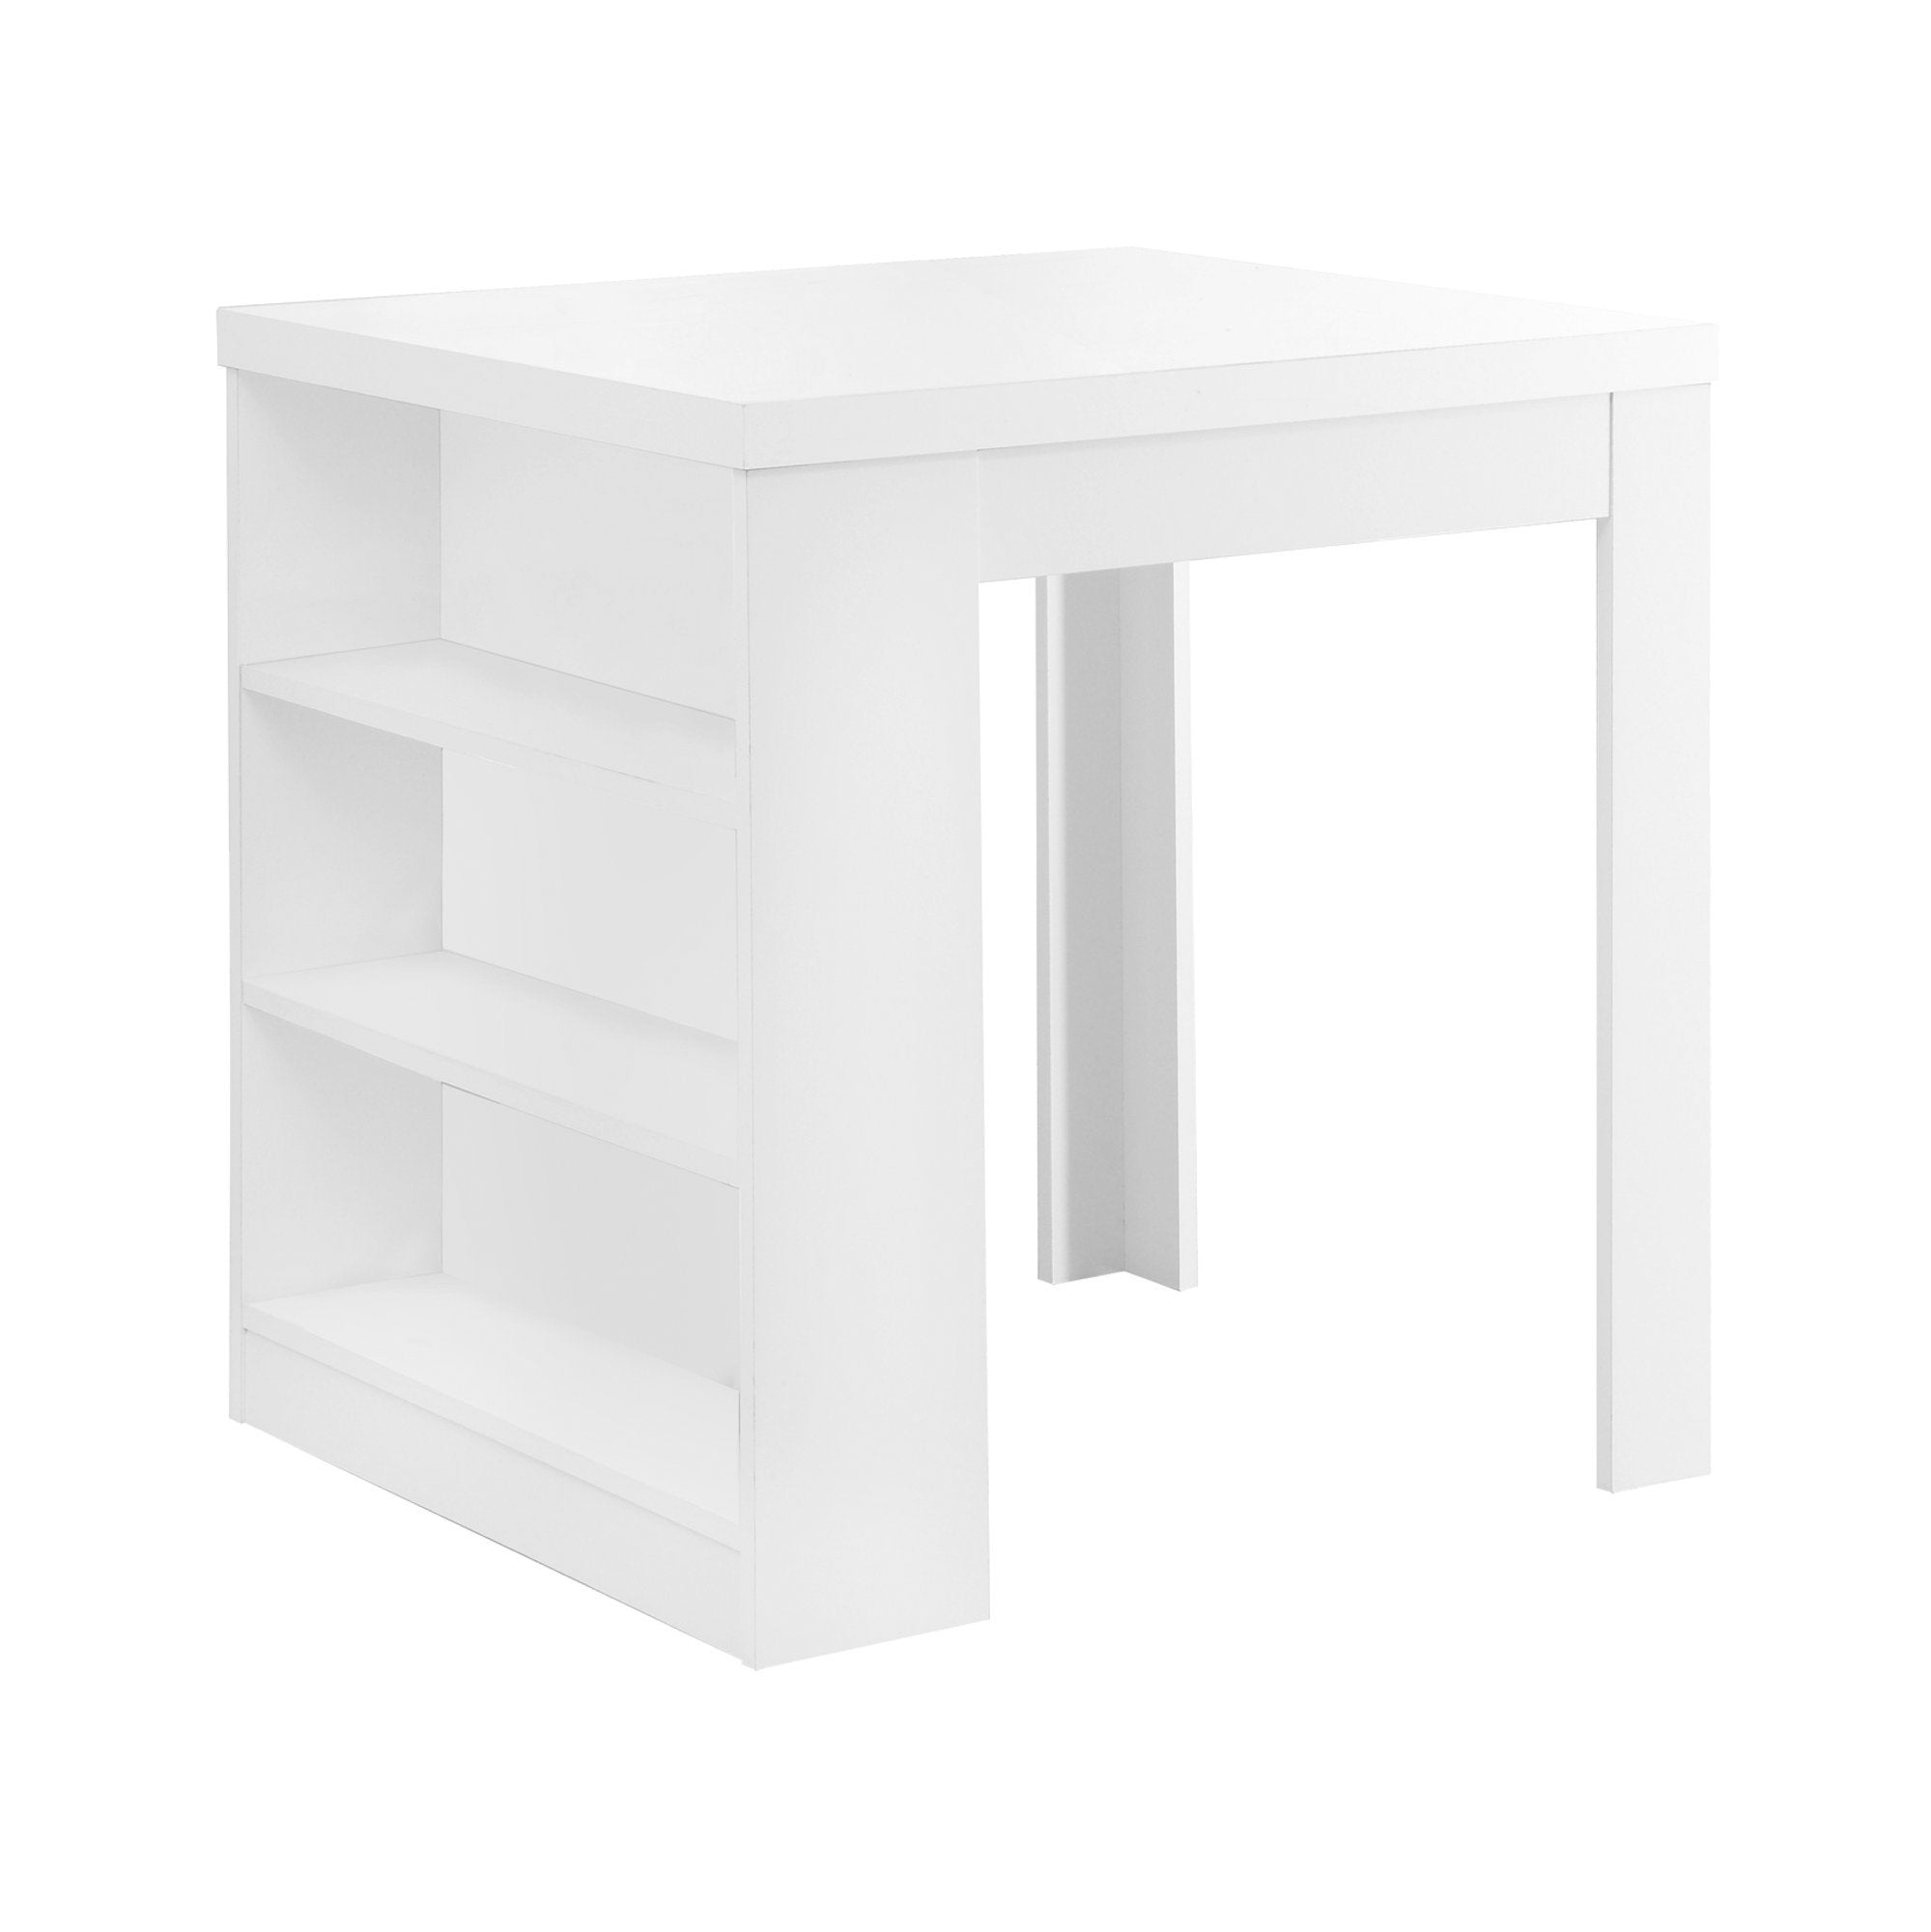 Square Counter Height Dining Table With Additional Storage Shelf (White)